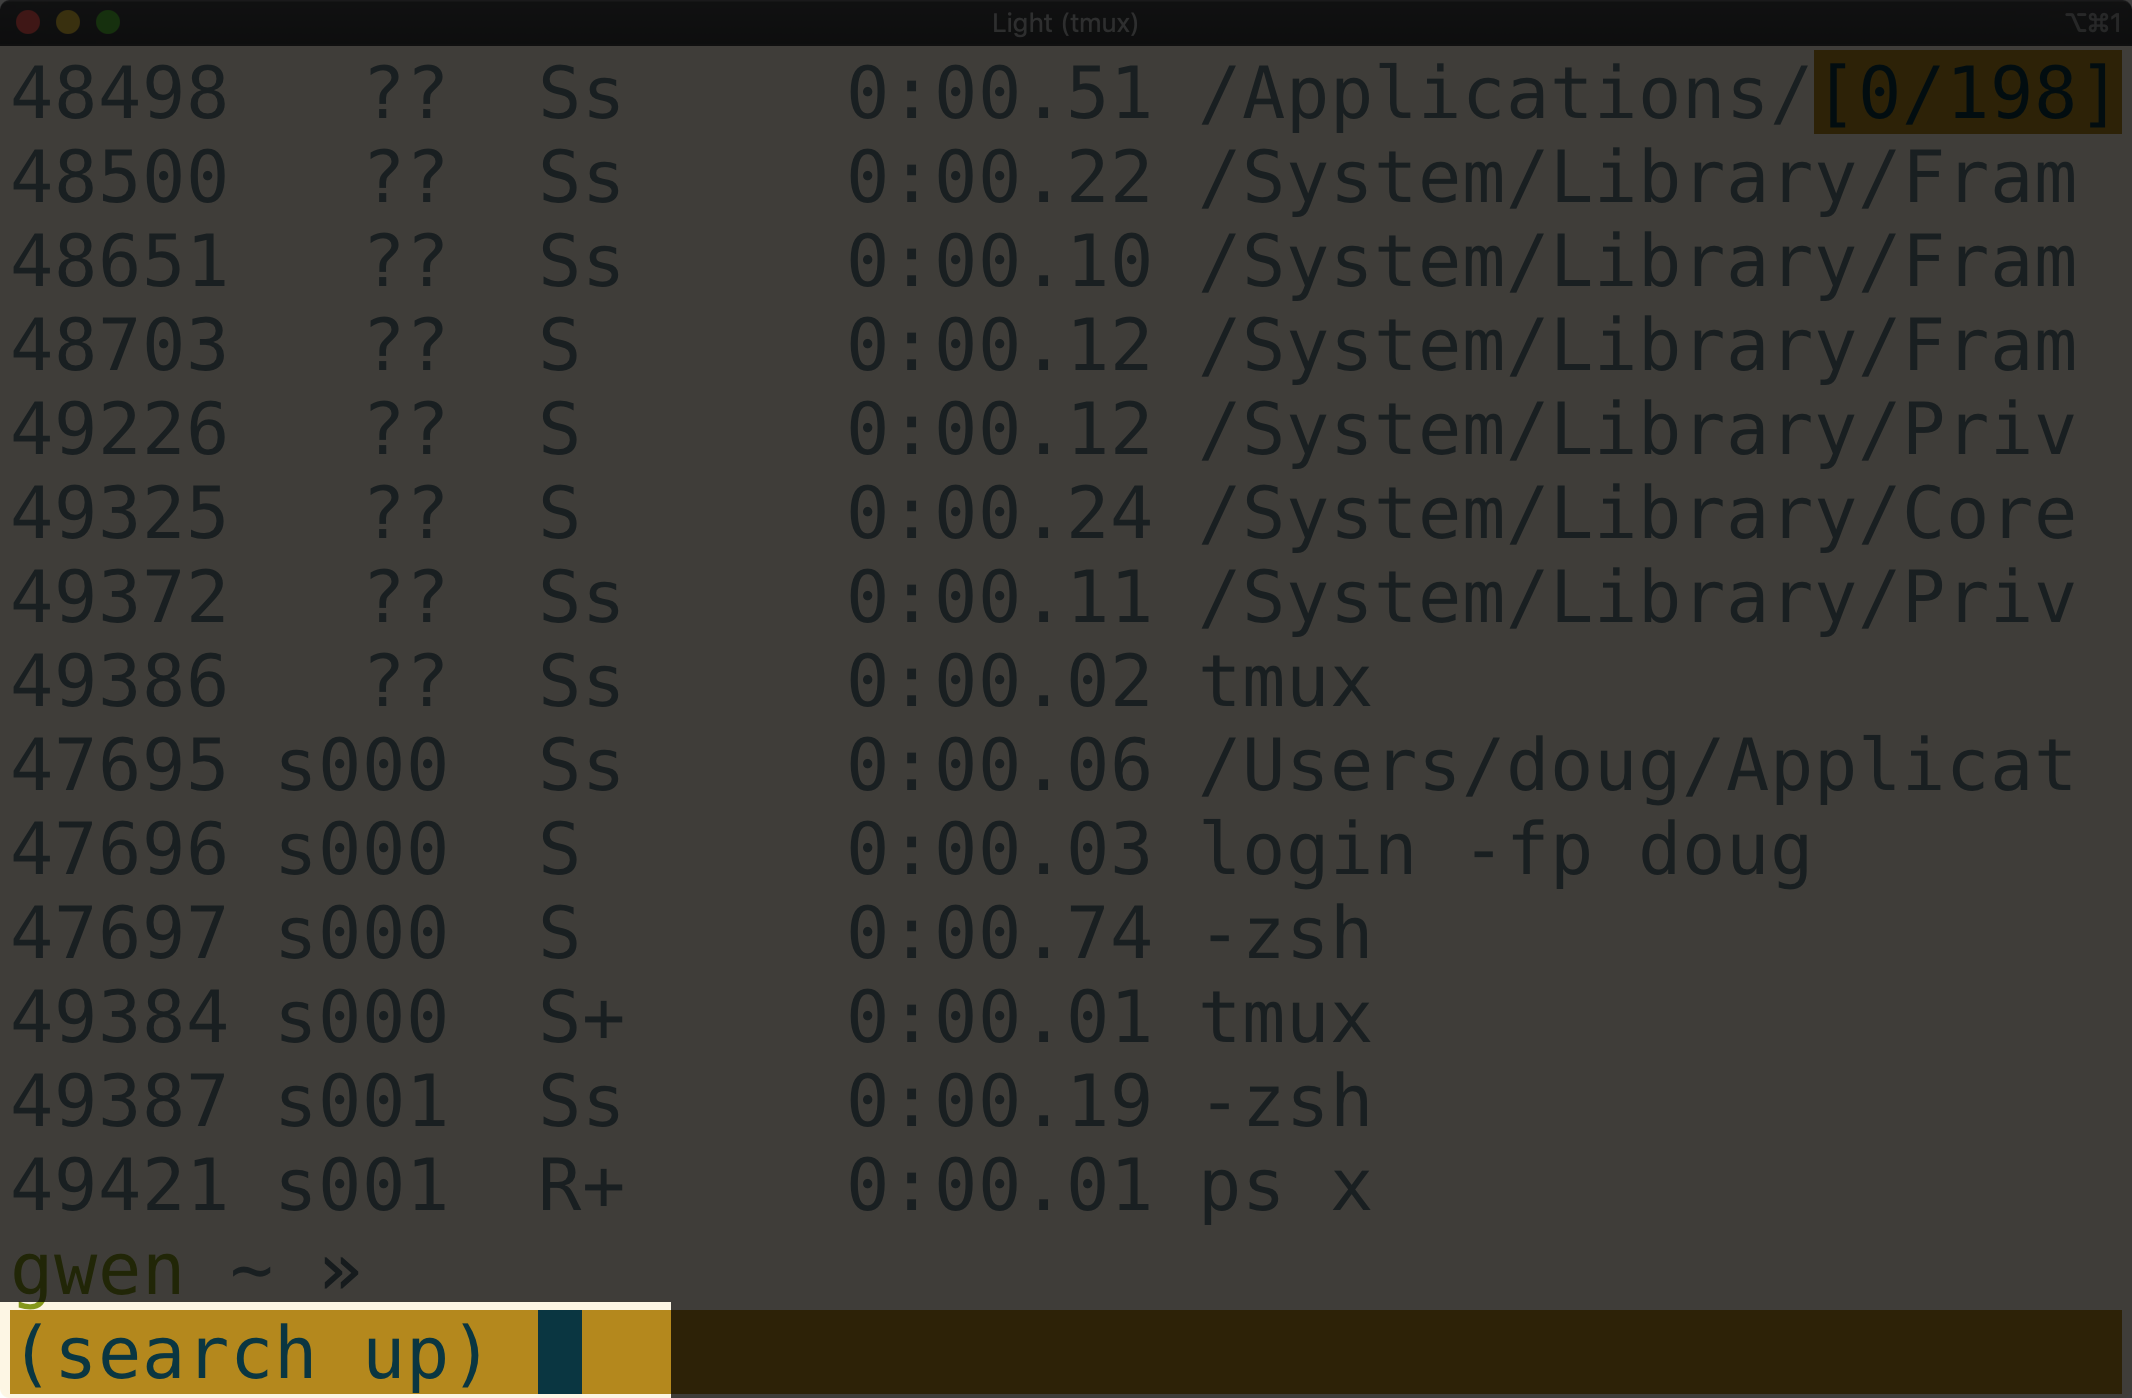 Tmux window showing (search up) in the status bar,
highlighted